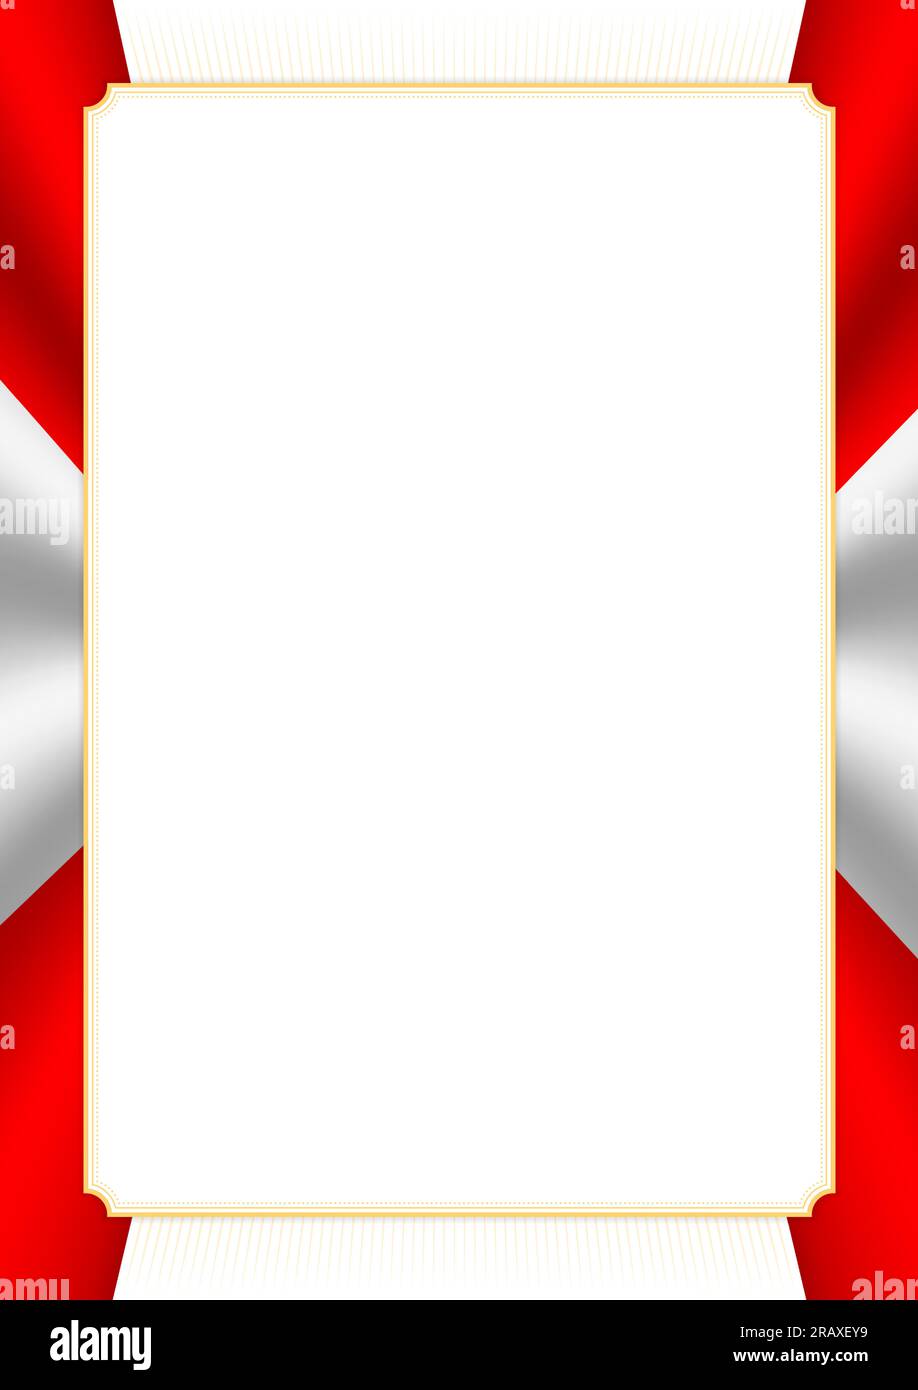 Vertical frame and border with colors of Canada flag, template elements ...